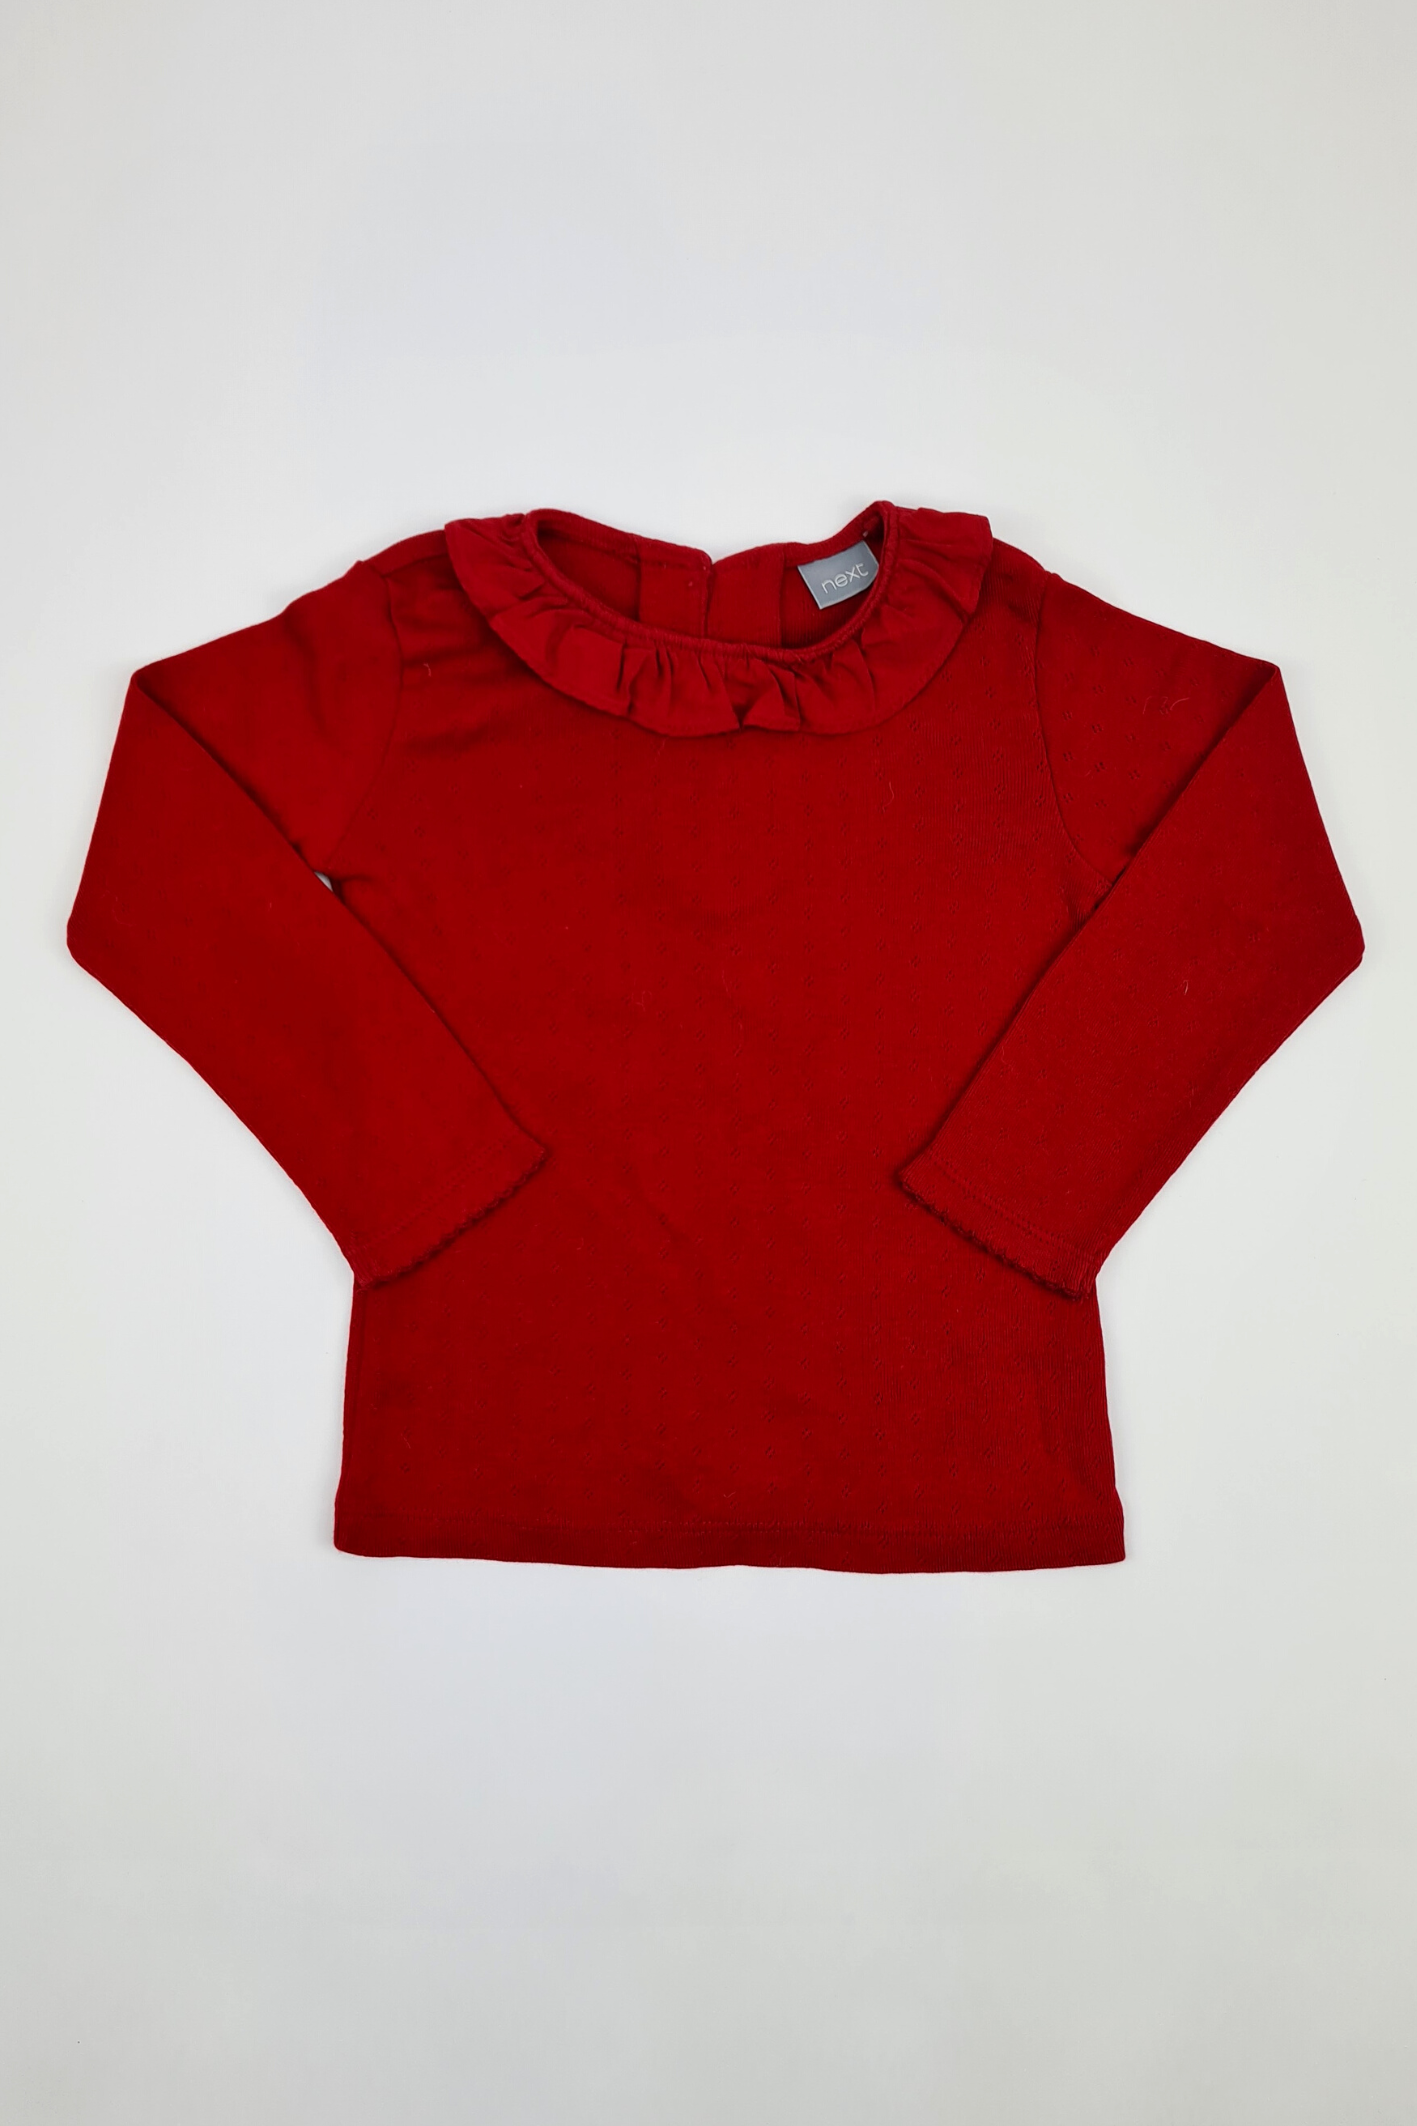 12-18m - Red Collared T-shirt (Next)